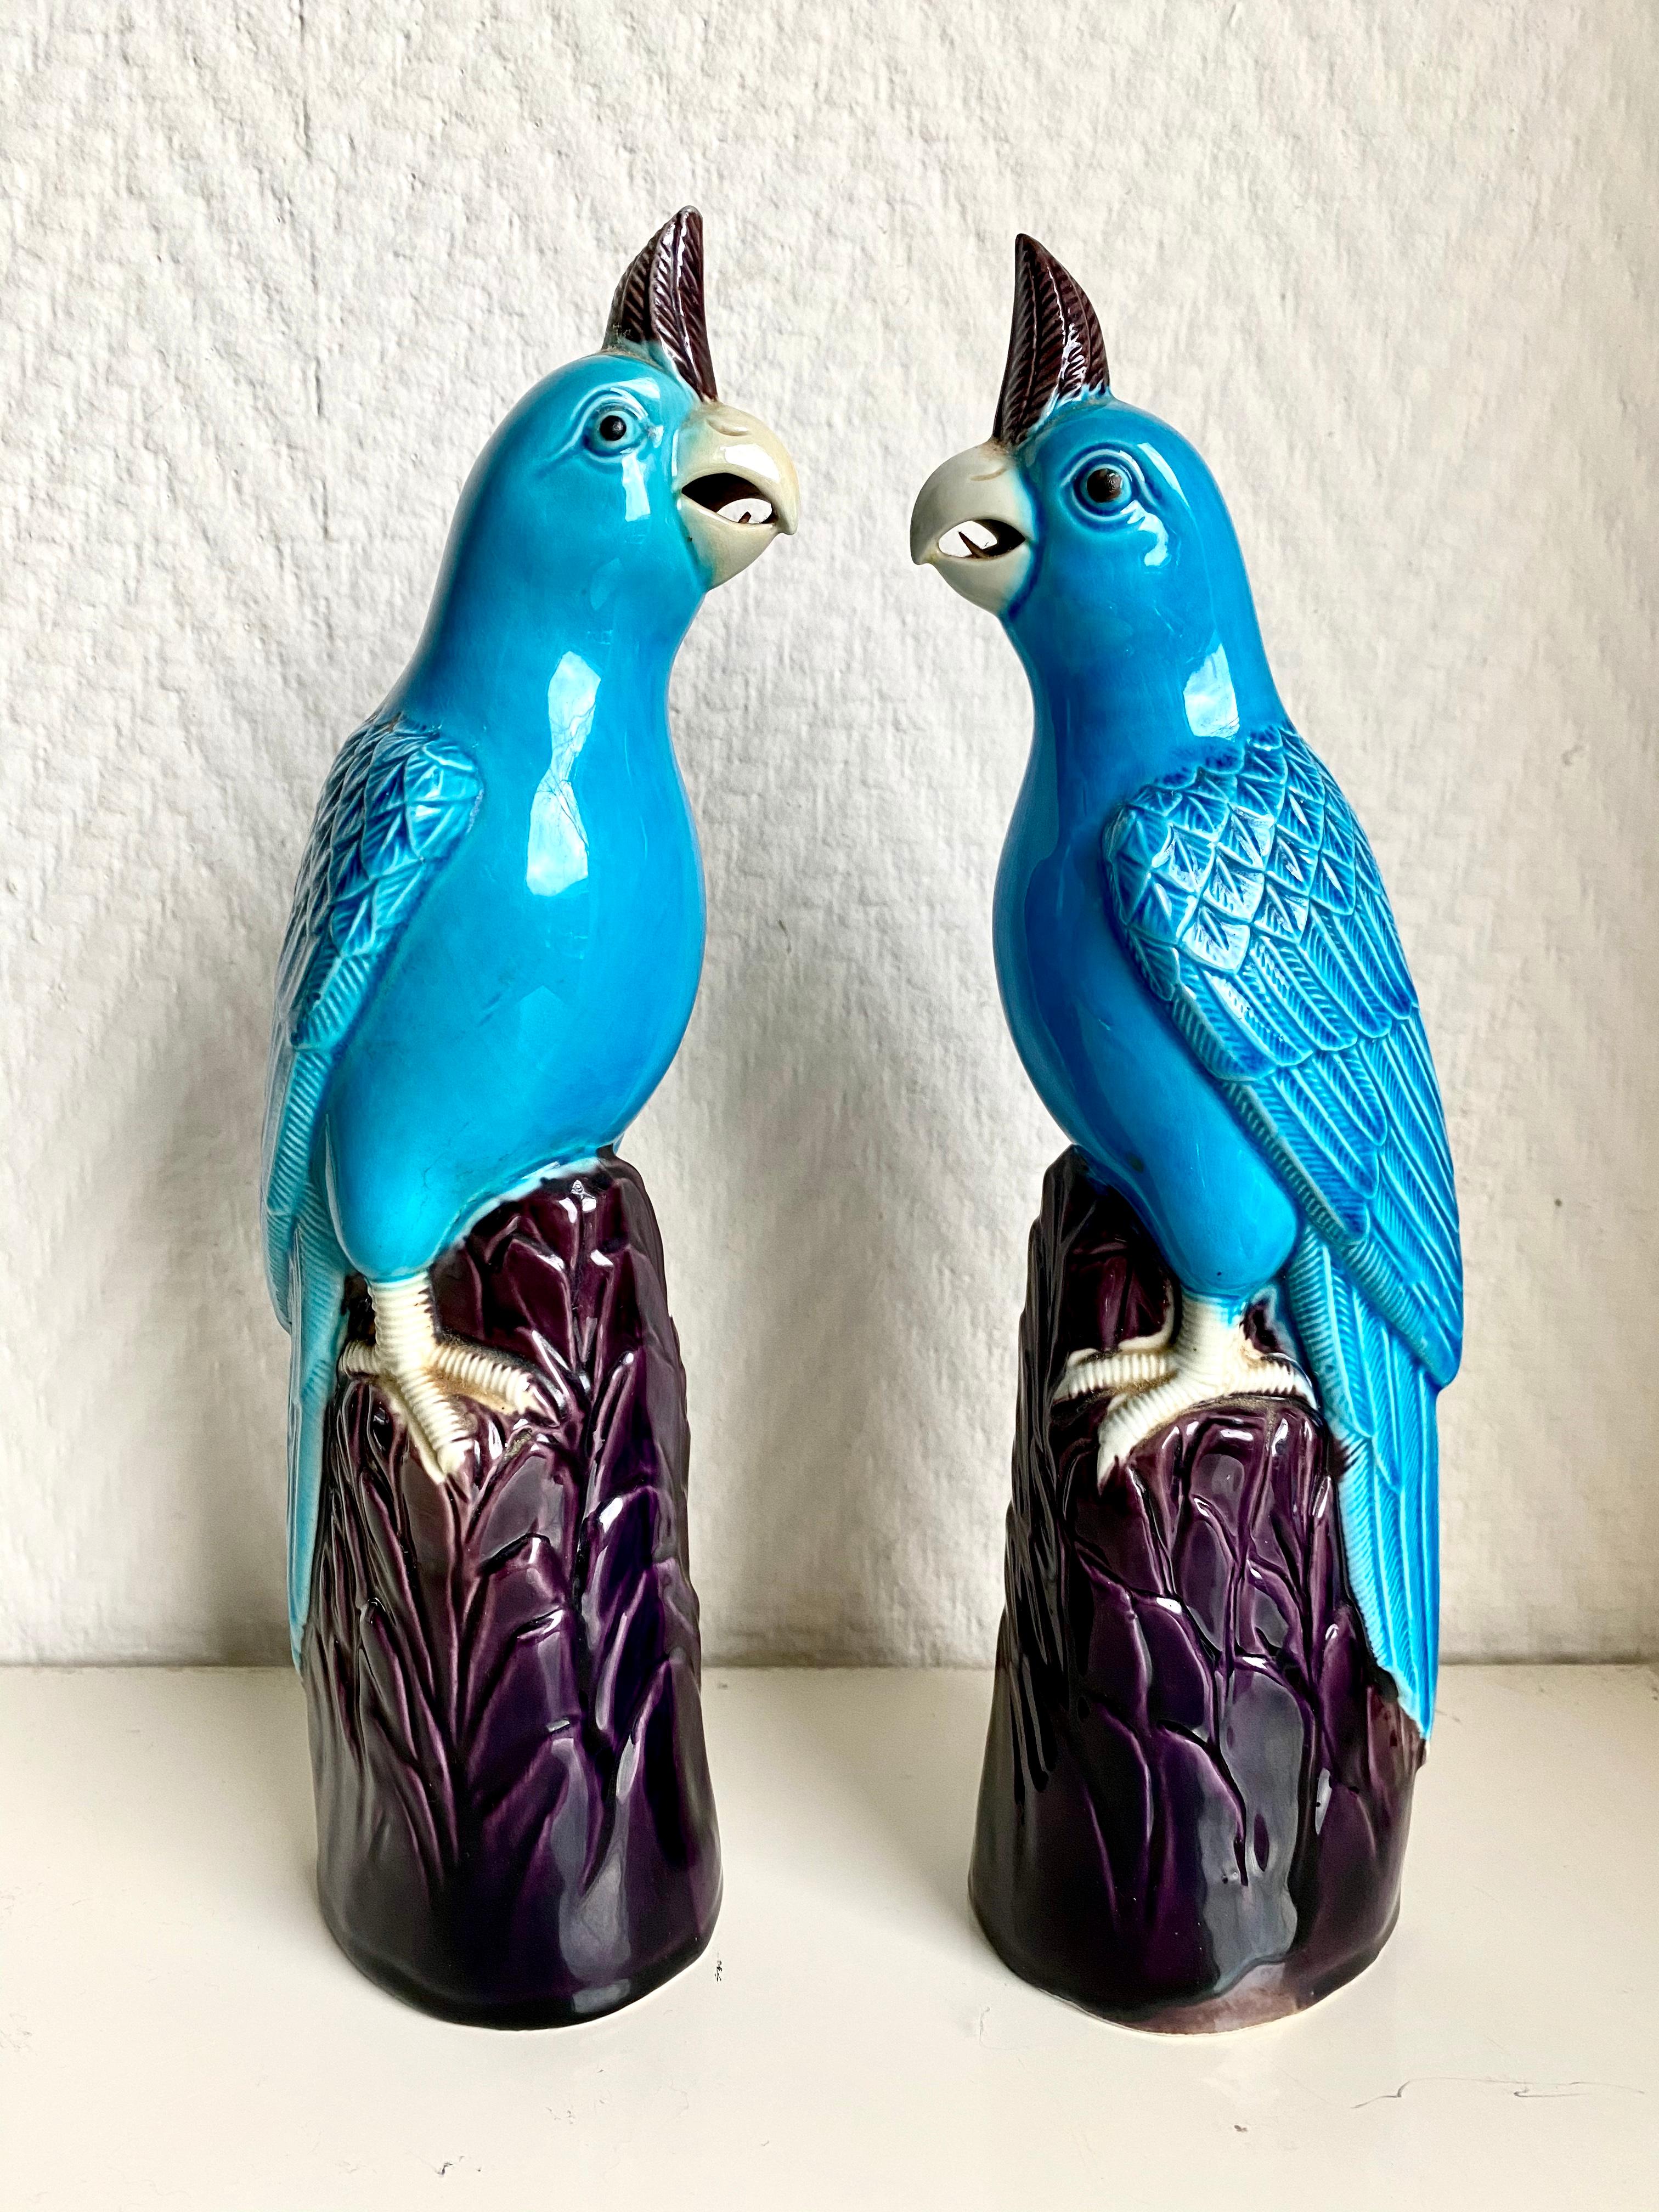 Glazed Pair of Late 20th Century Porcelain Turqoise Cockatoos For Sale